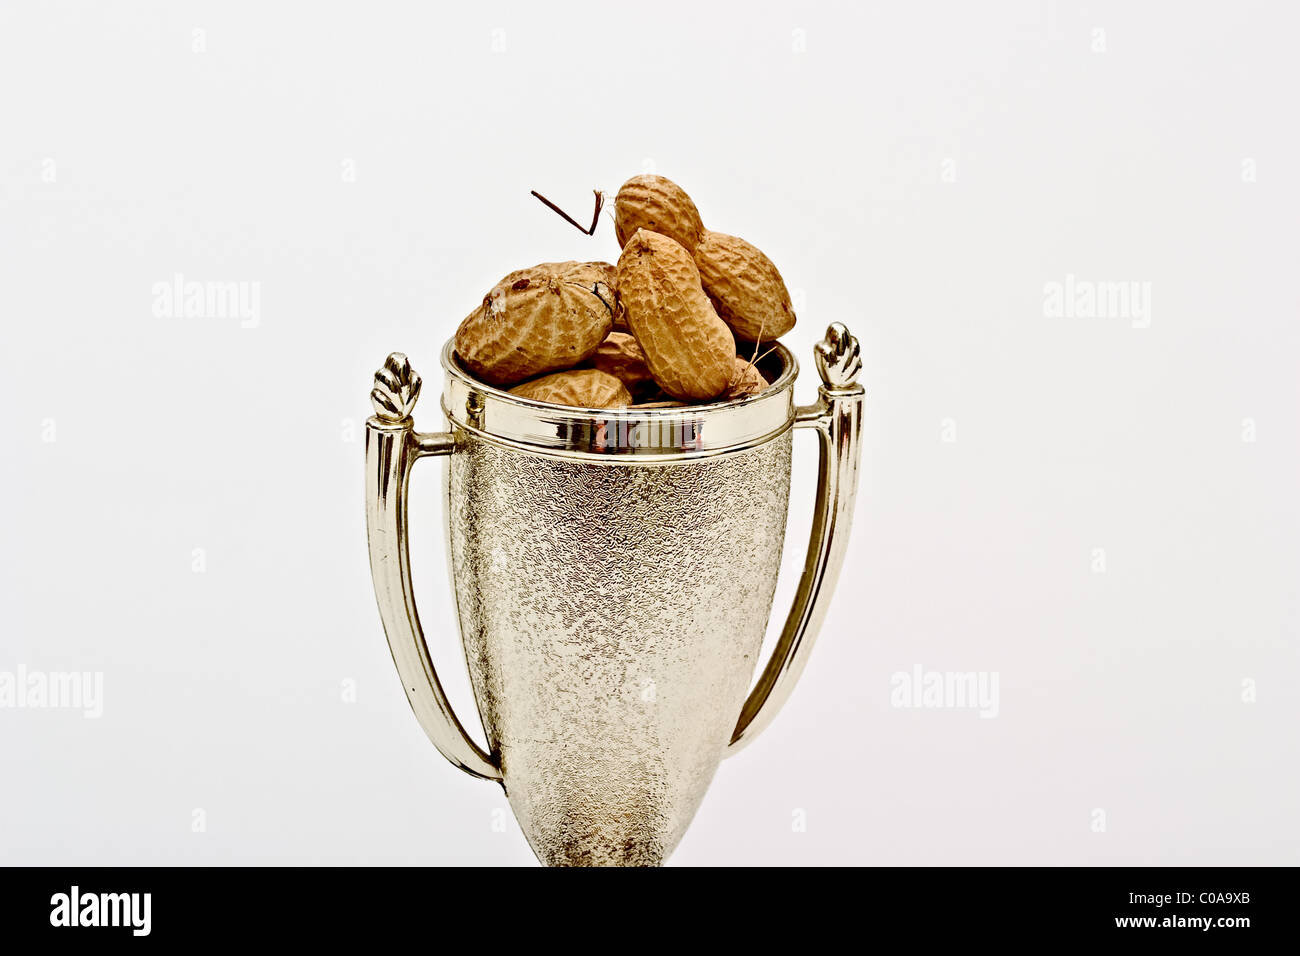 A trophy cup filled with peanuts in shells Stock Photo